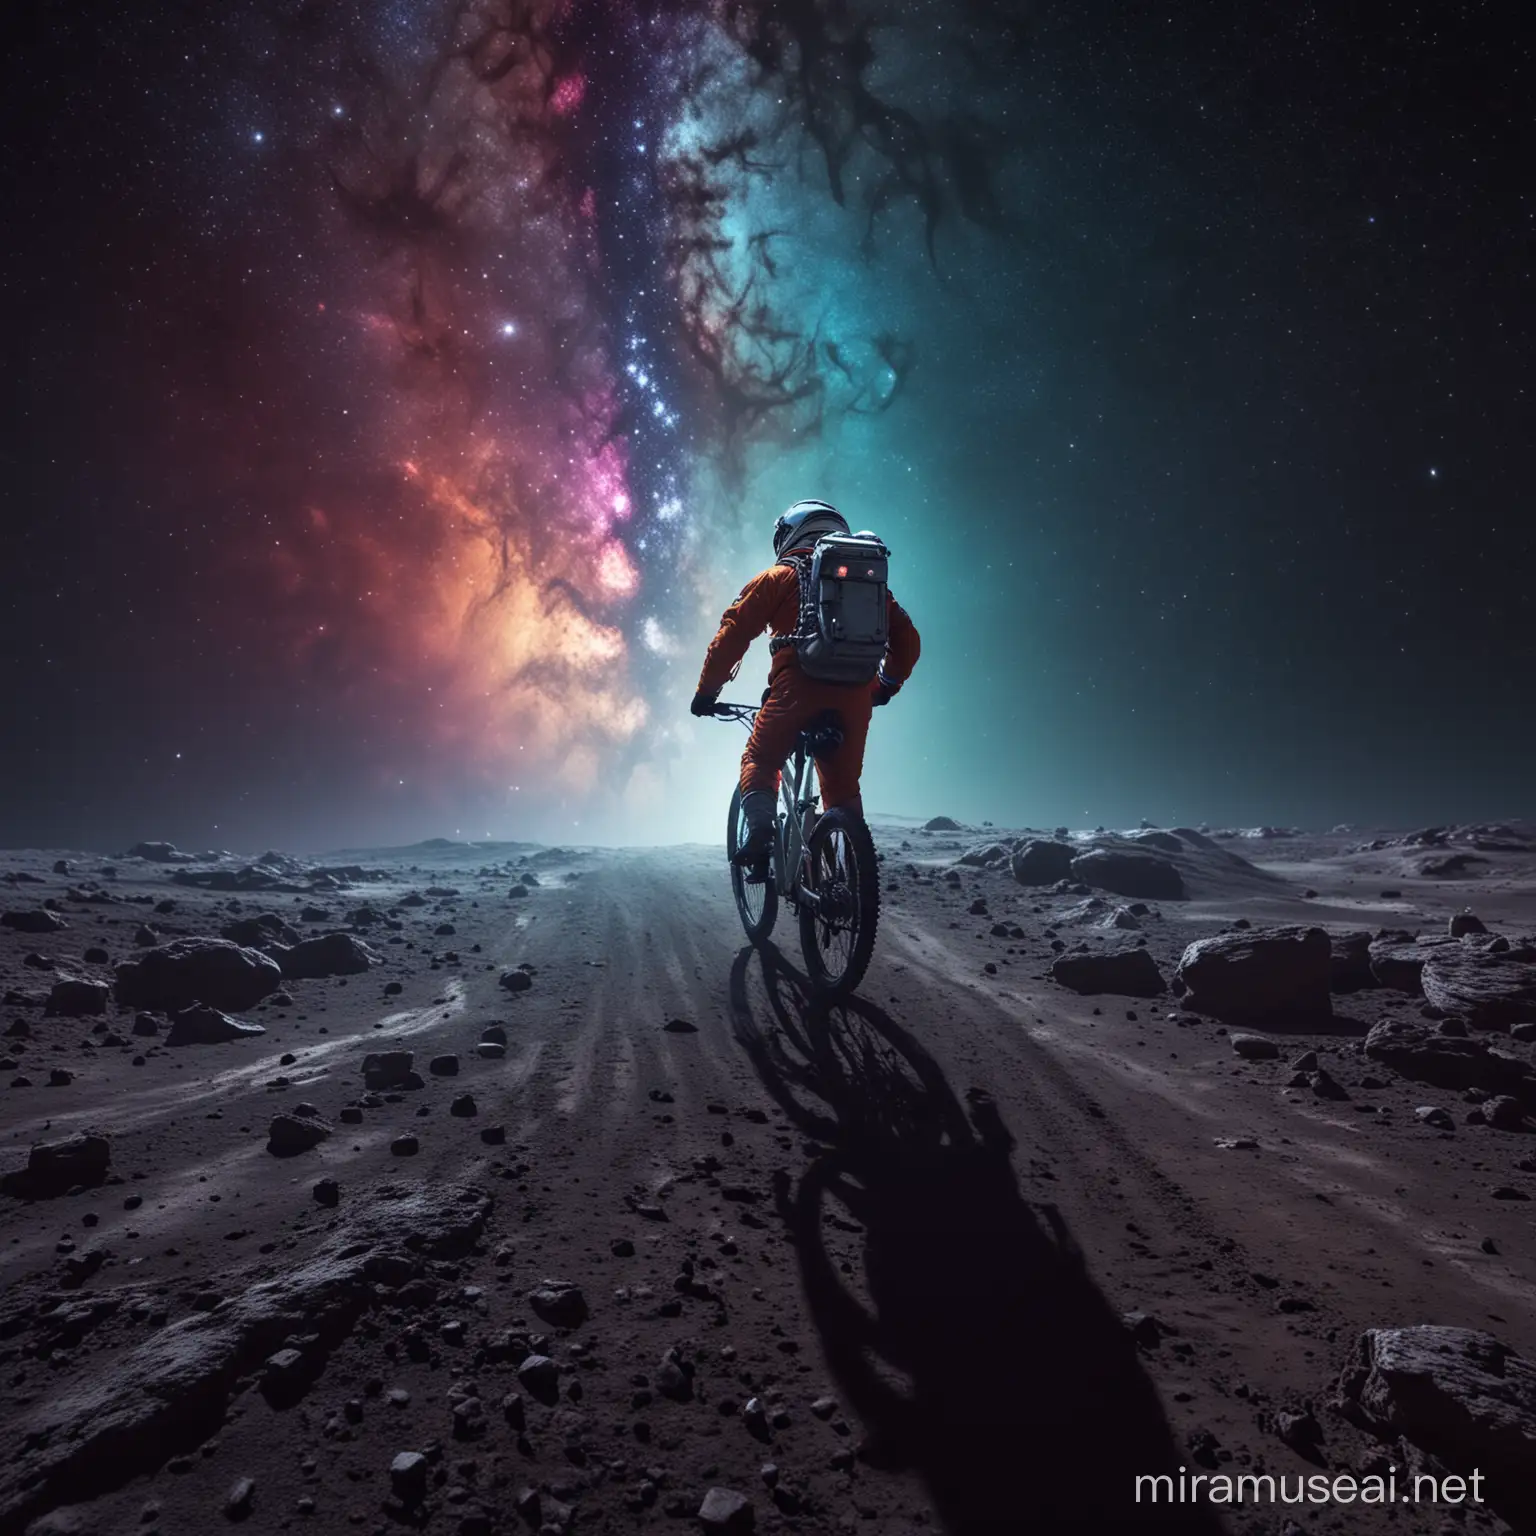 An astronaut riding bicycle in space in a dark environment, colorful atmosphere , Wide/Long Shot